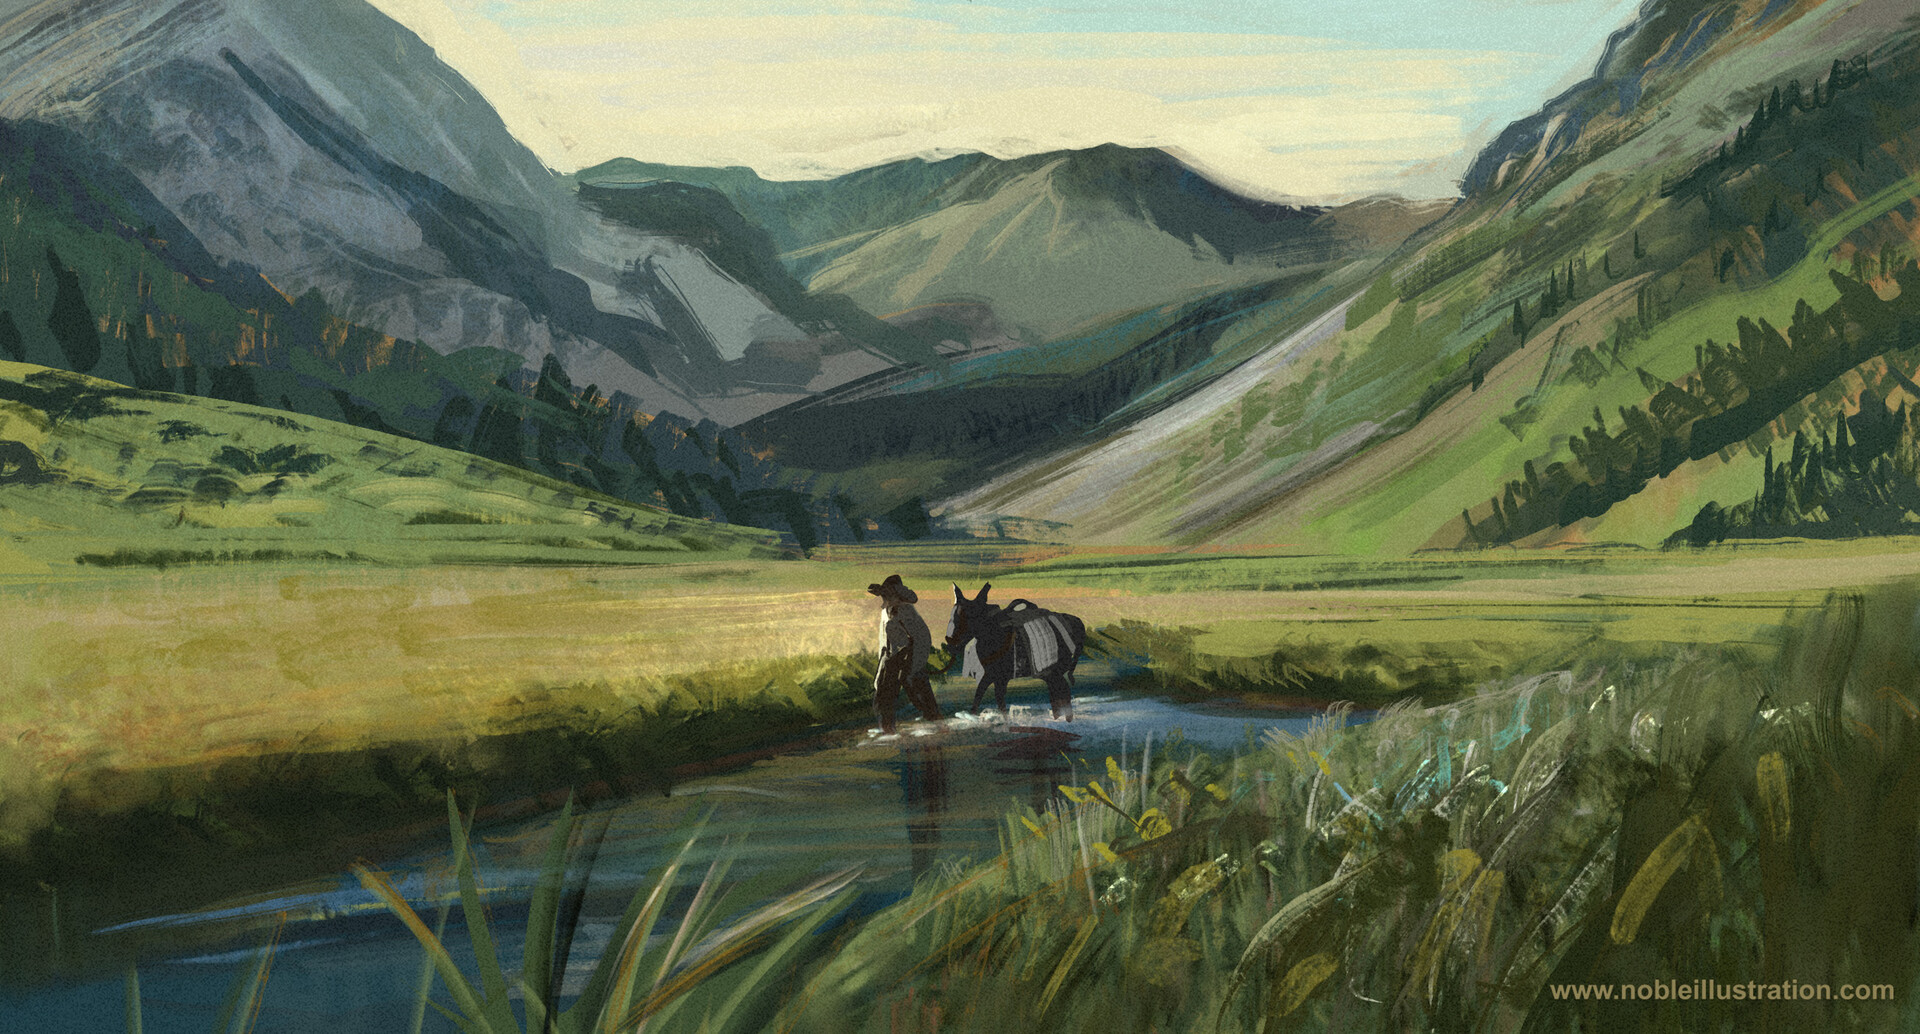 Buster Scruggs Painting Art Print the Ballad of Buster Scruggs 